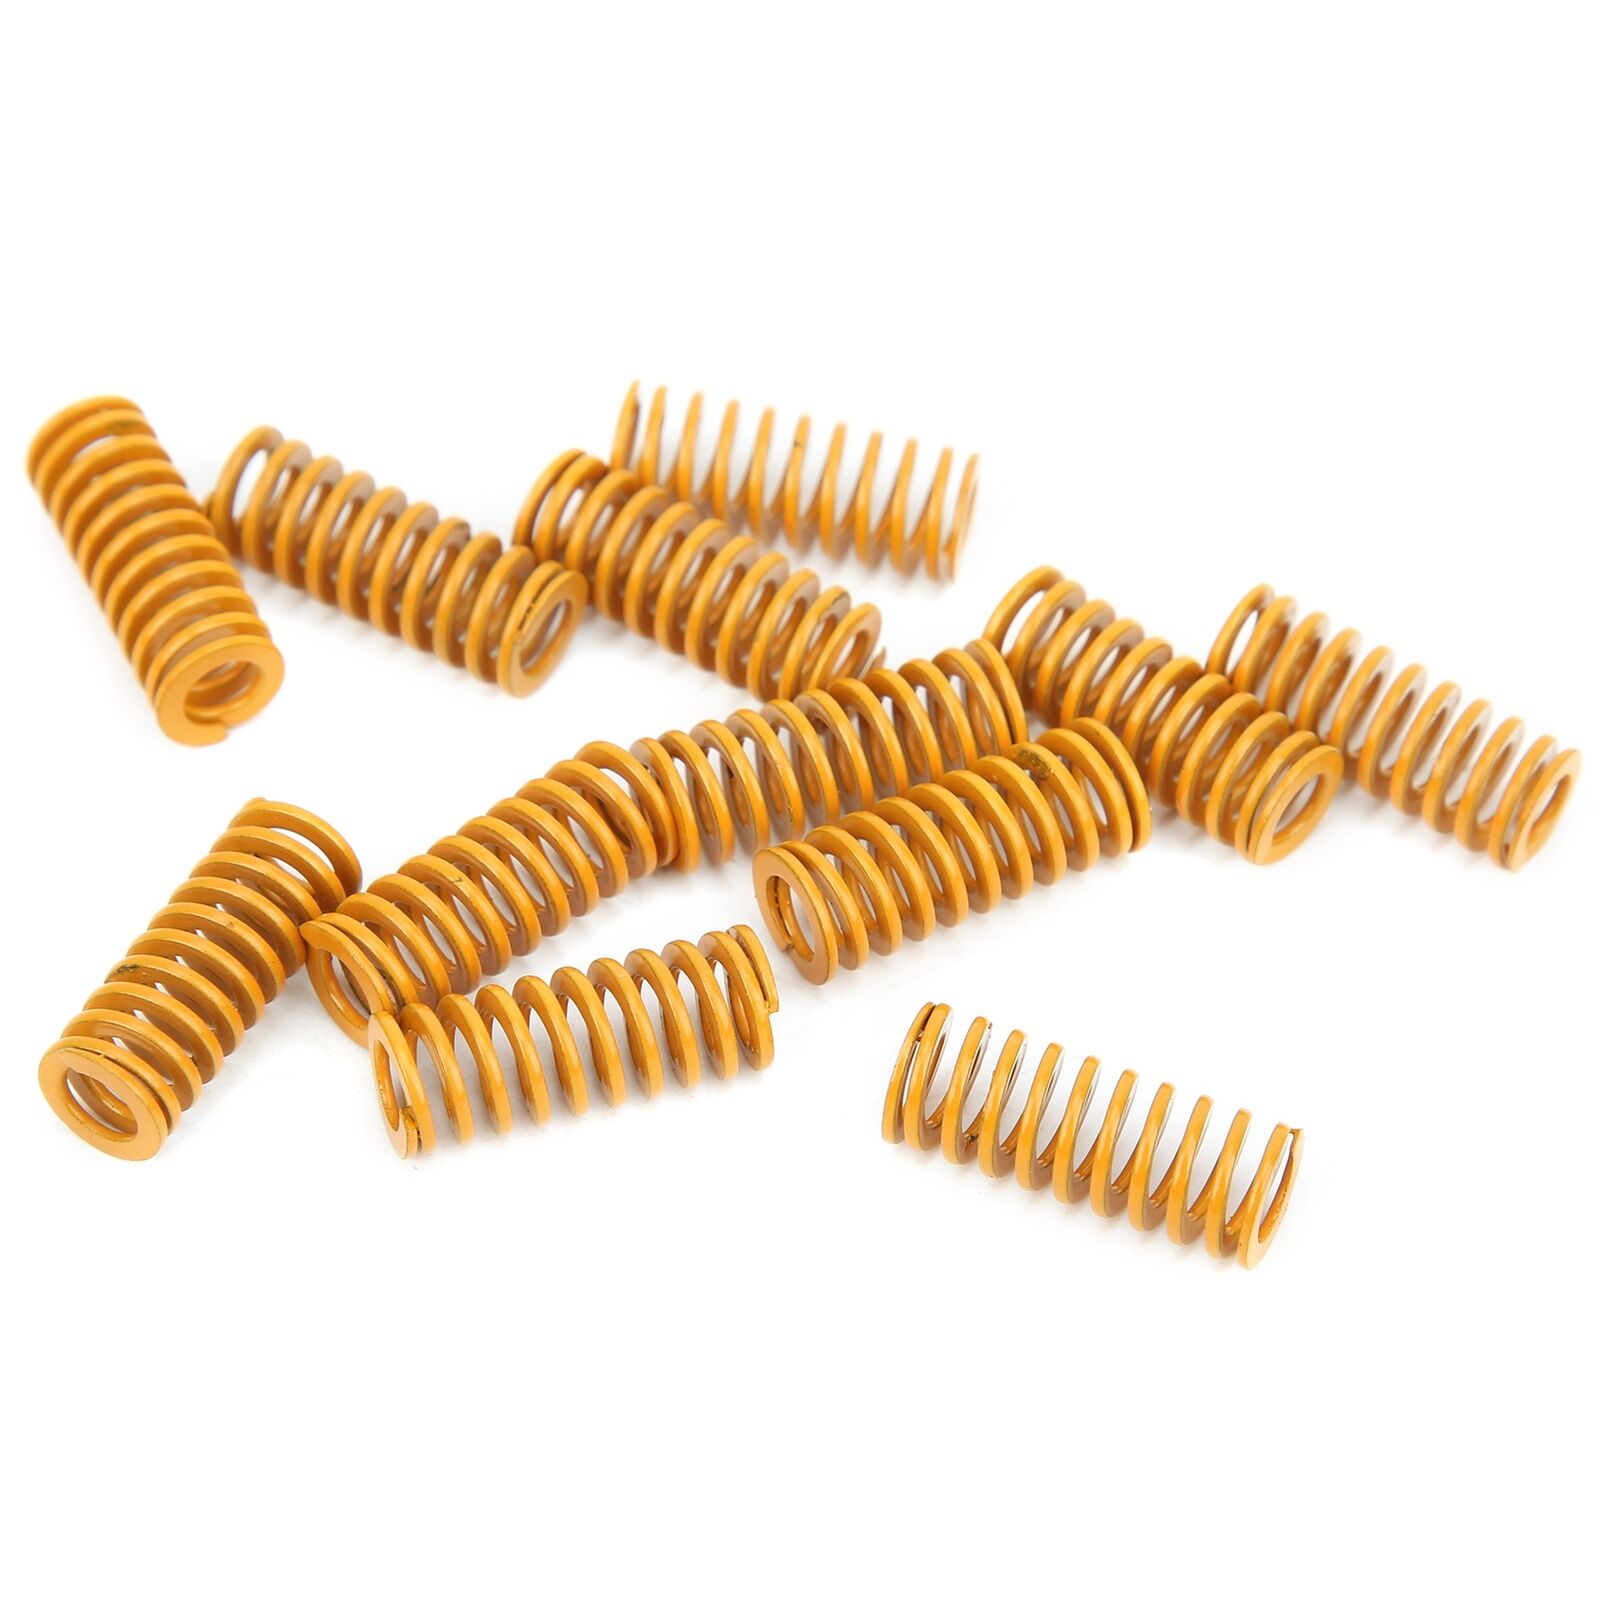 24Pcs 3D Printer Parts Spring For Heated Bed Extruder Accessories 25 X 8mm GAW